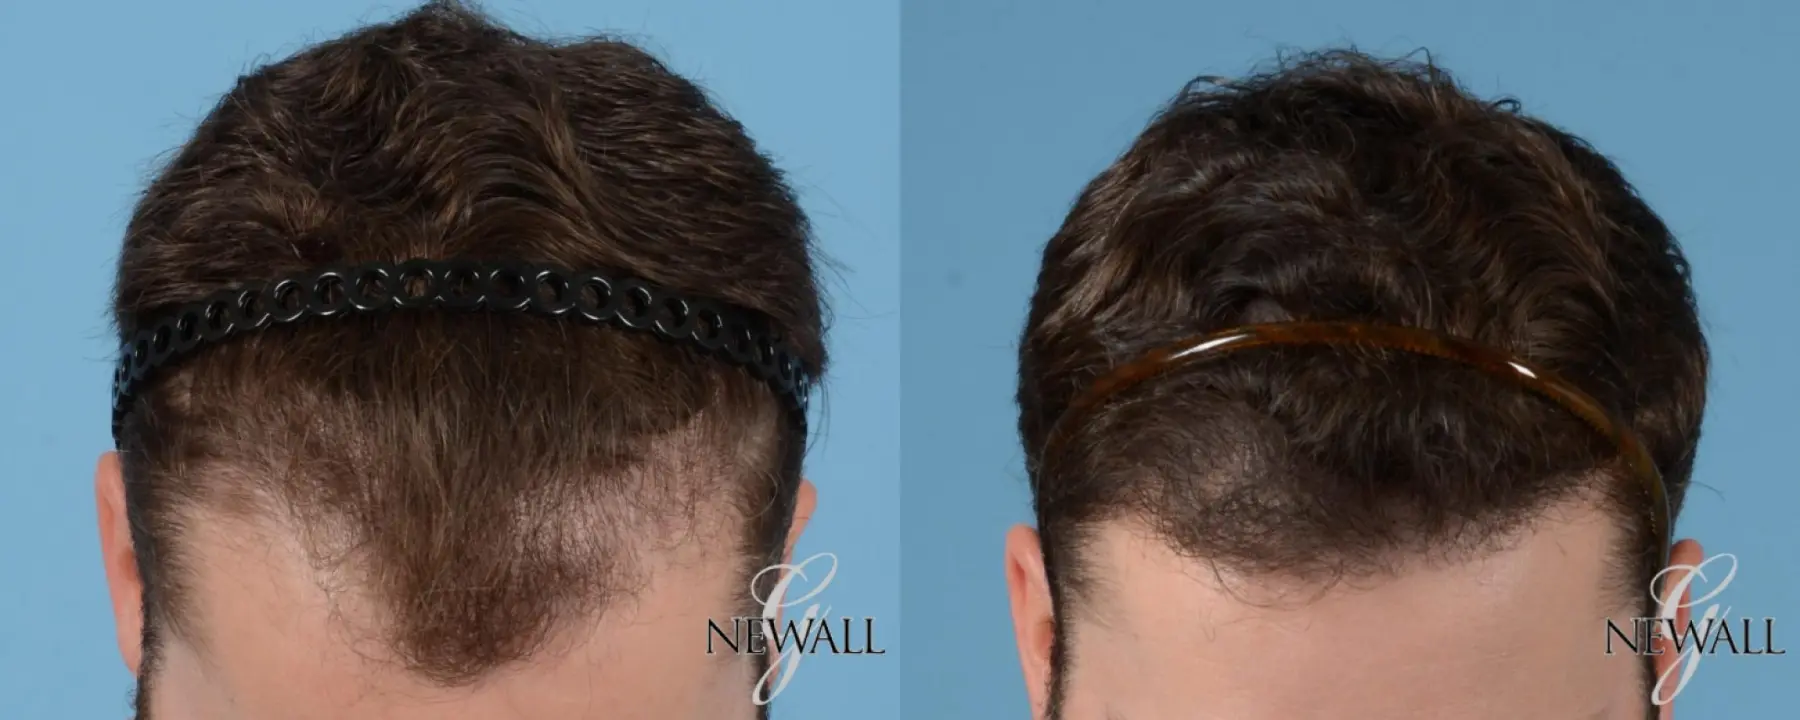 Hair-transplantation-for-men: Patient 1 - Before and After  